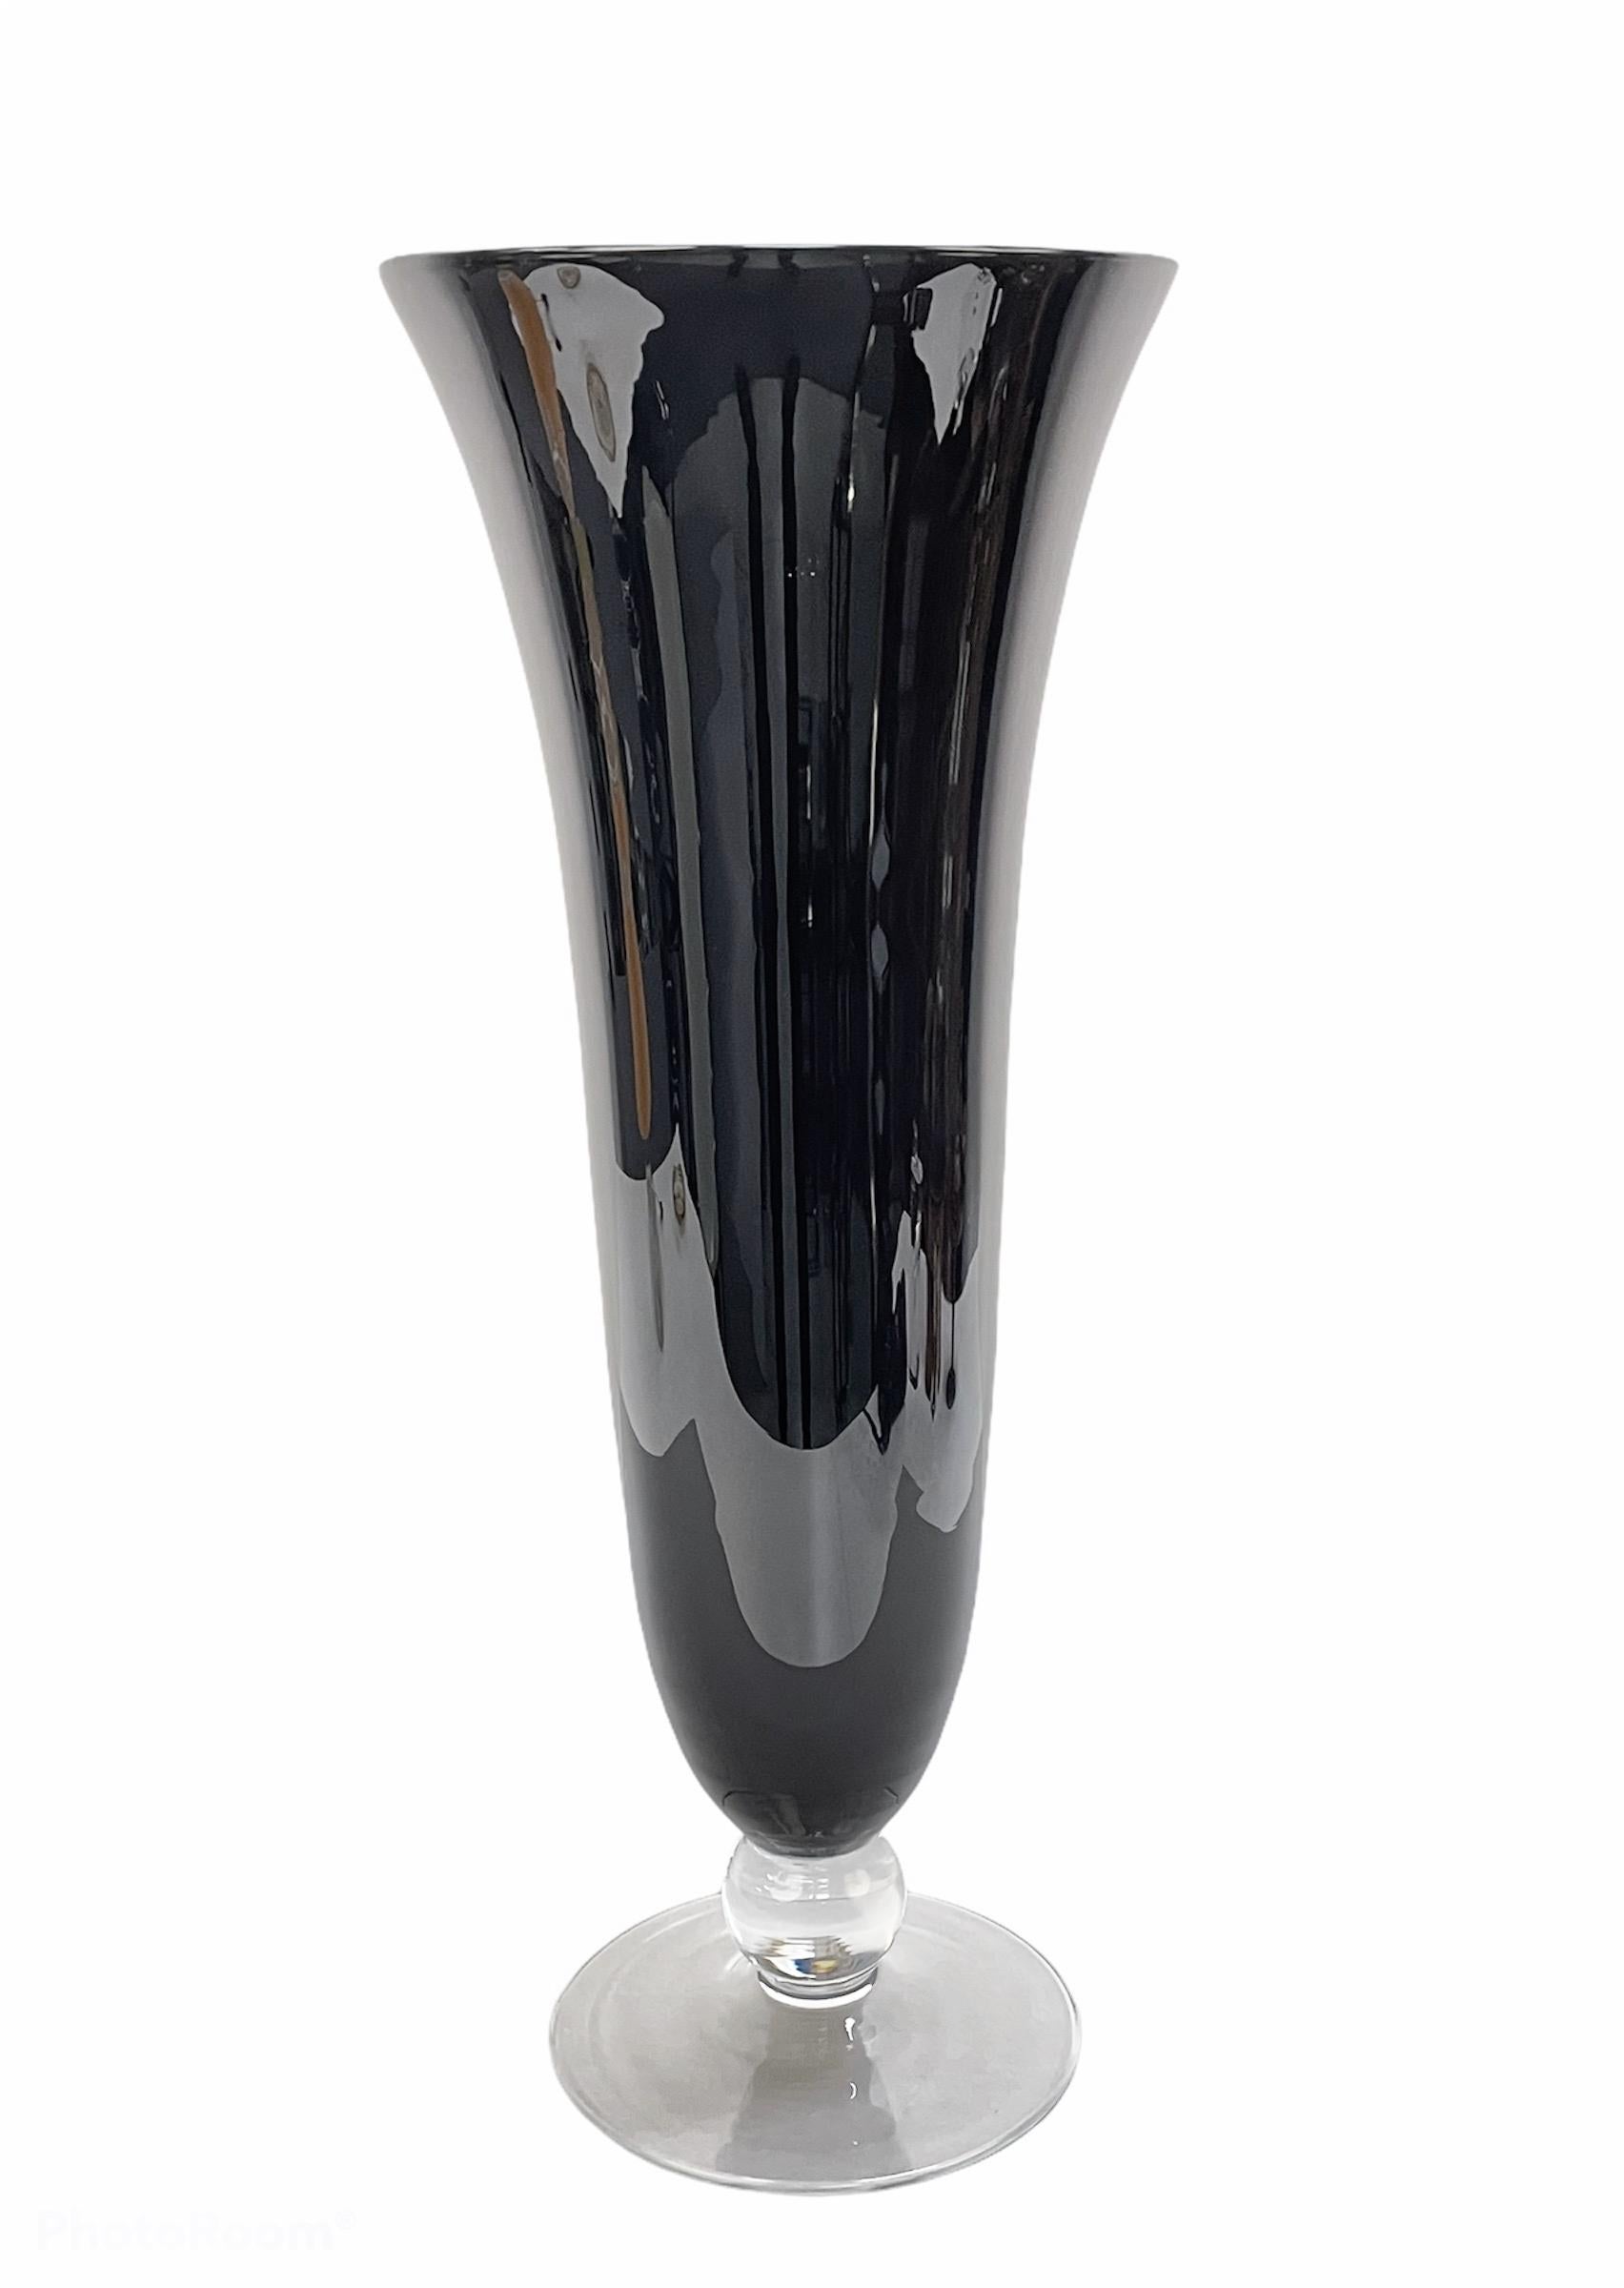 Midcentury Large Italian Black Glass Artistic Vase with Crystal Base, 1980s For Sale 2